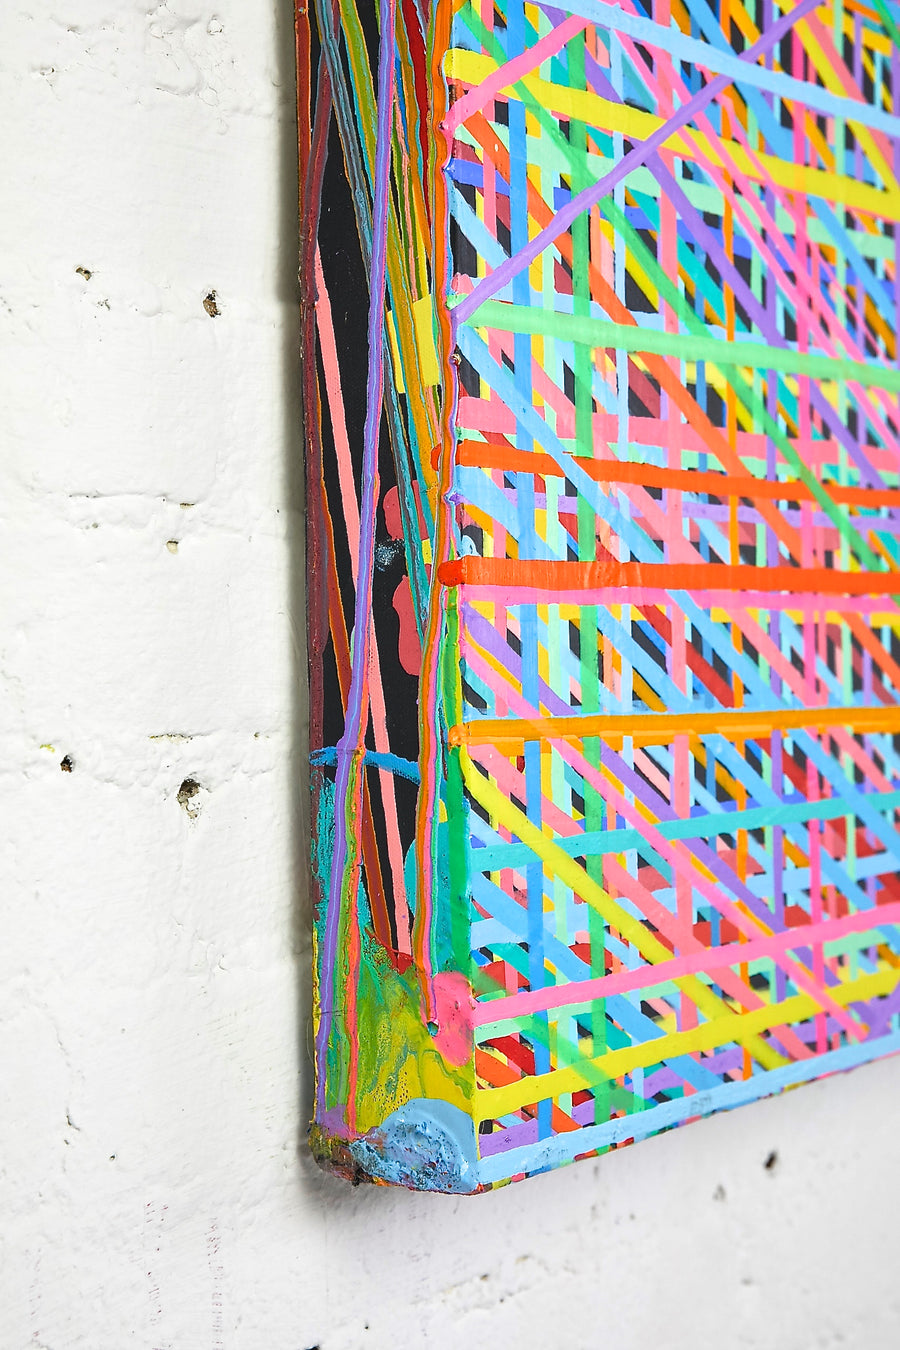 Detail shot of multicolor rainbow abstract drip painting by New York based artist Jon James. Represented by fine art gallery Tuleste Factory in Chelsea, NYC.